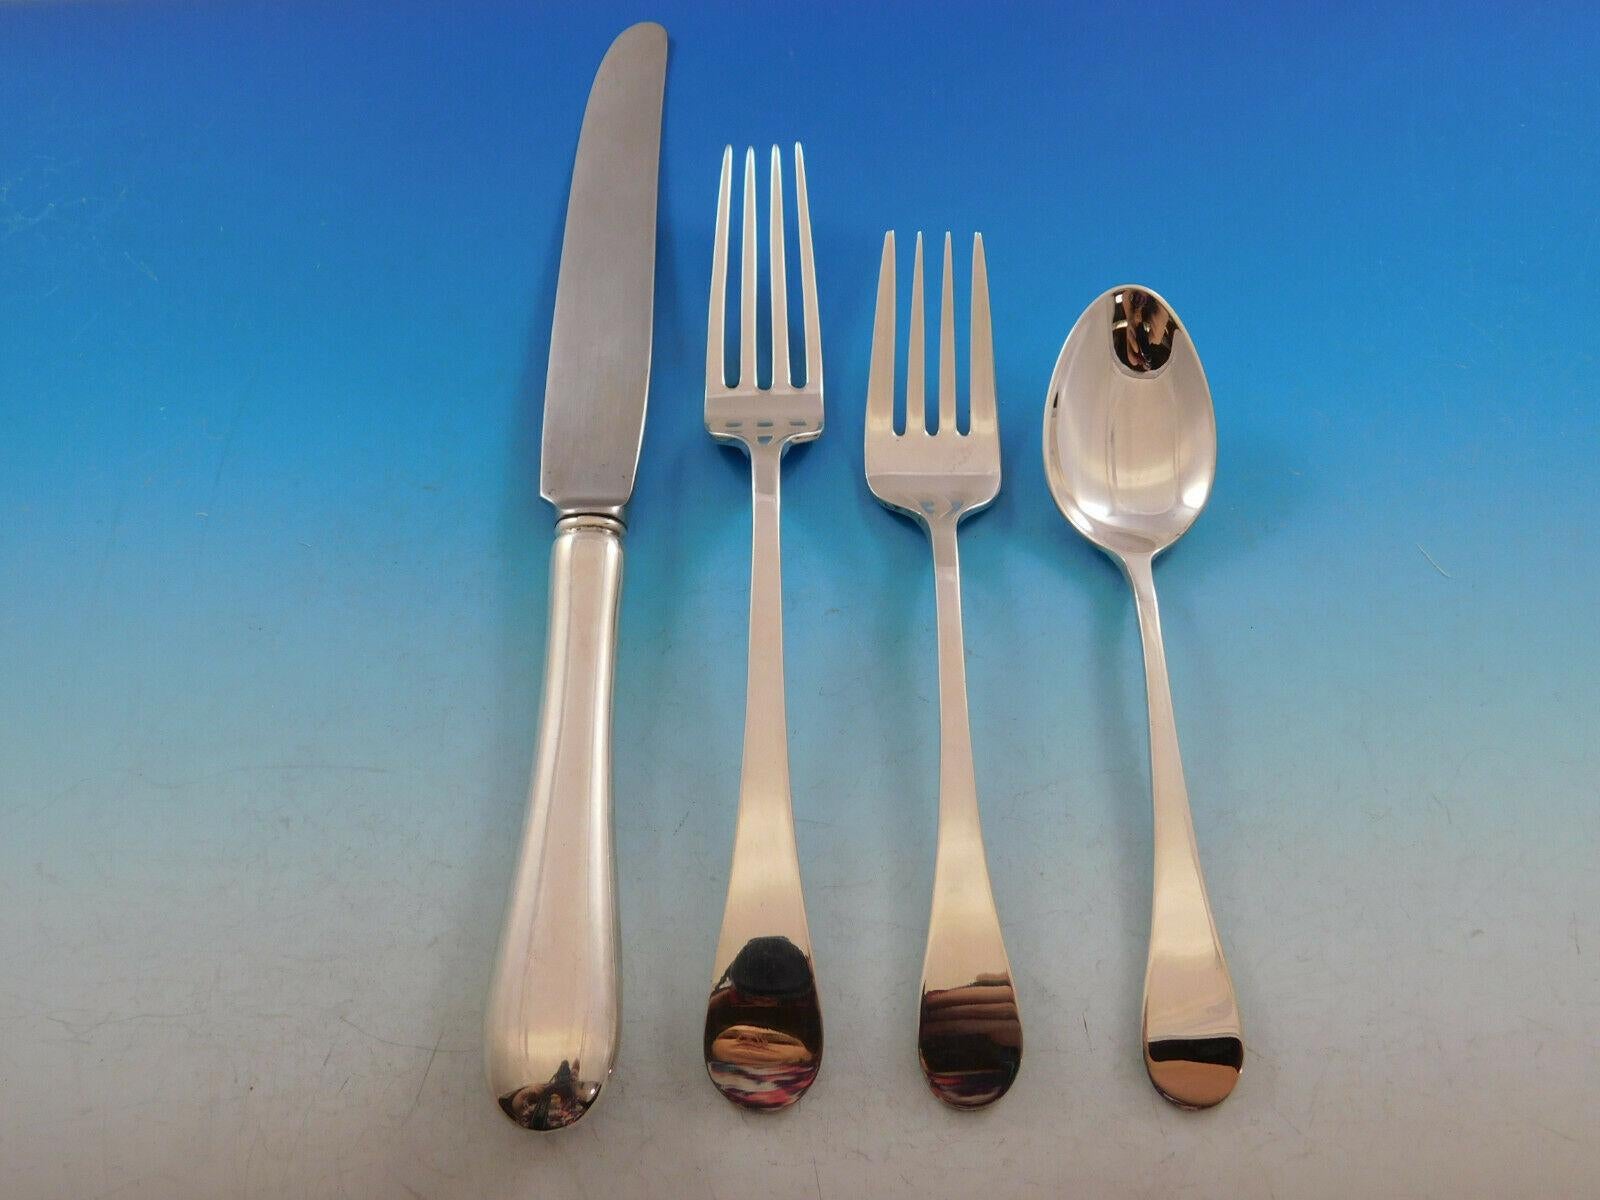 The unadorned Hannah Hull pattern, known for its simple, clean lines, was inspired by old colonial design and was first introduced by Tuttle in 1974.

Dinner size Hannah Hull by Tuttle sterling silver flatware set - 38 pieces. Great starter set!